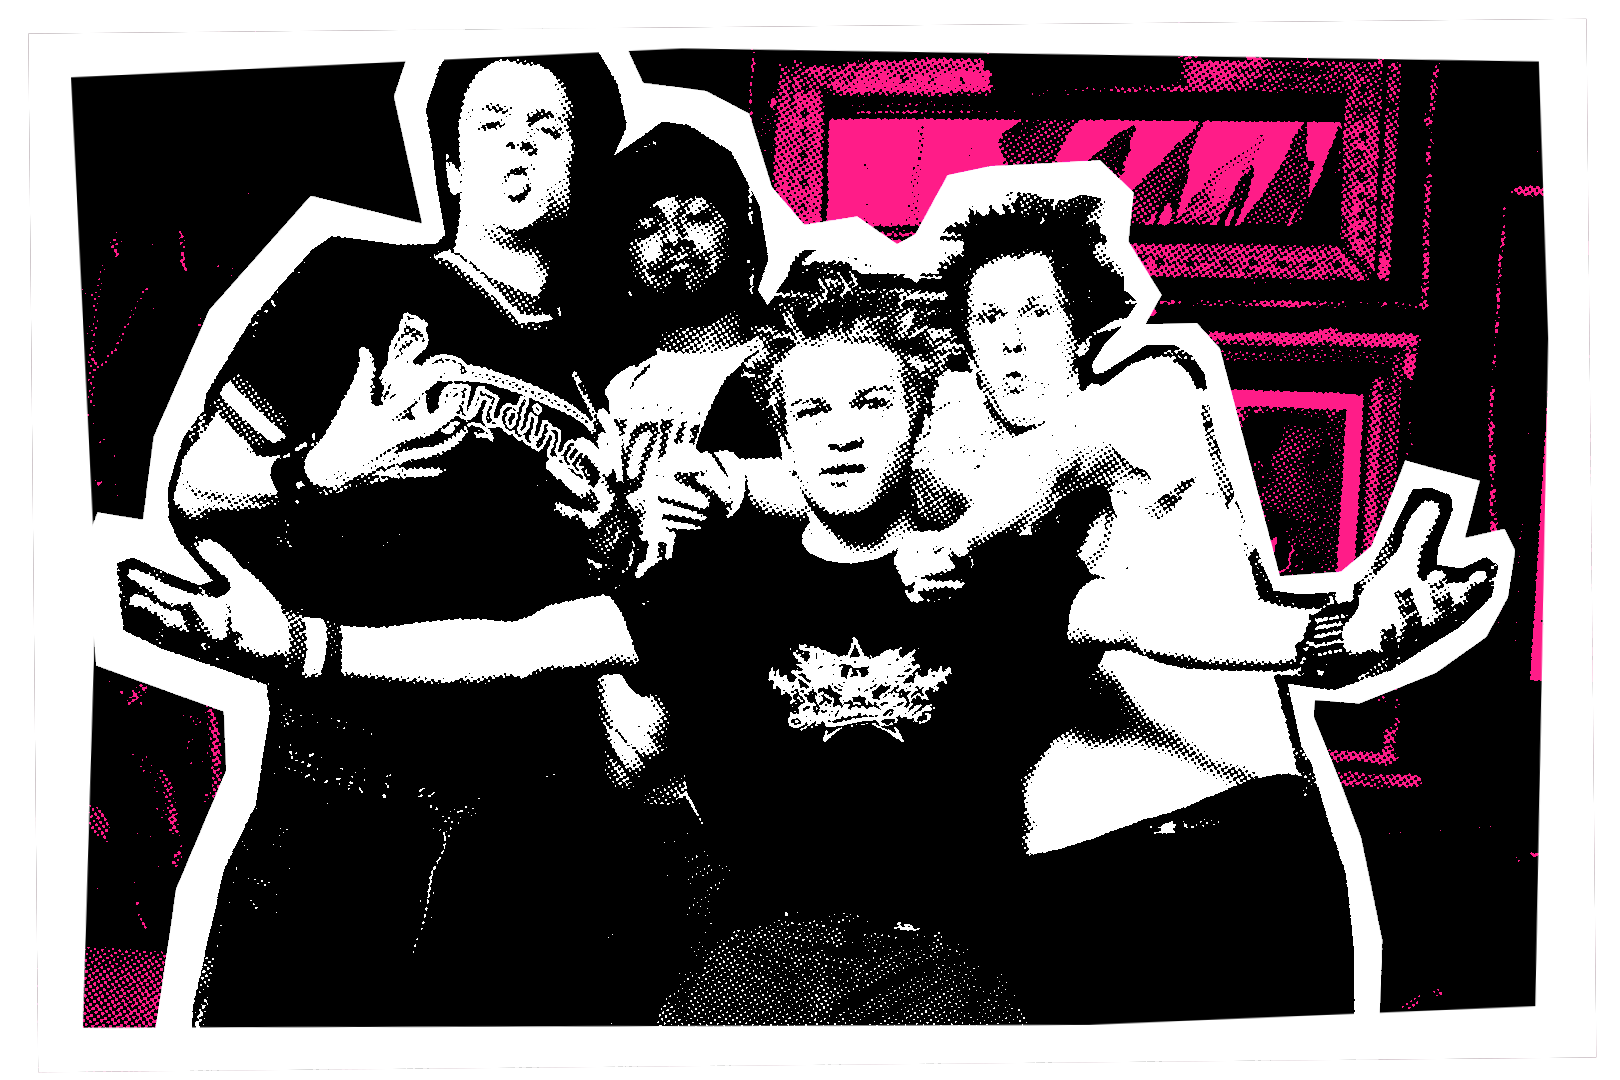 Ranking the Sum 41 Albums: From Pop-Punk to Thrash Metal